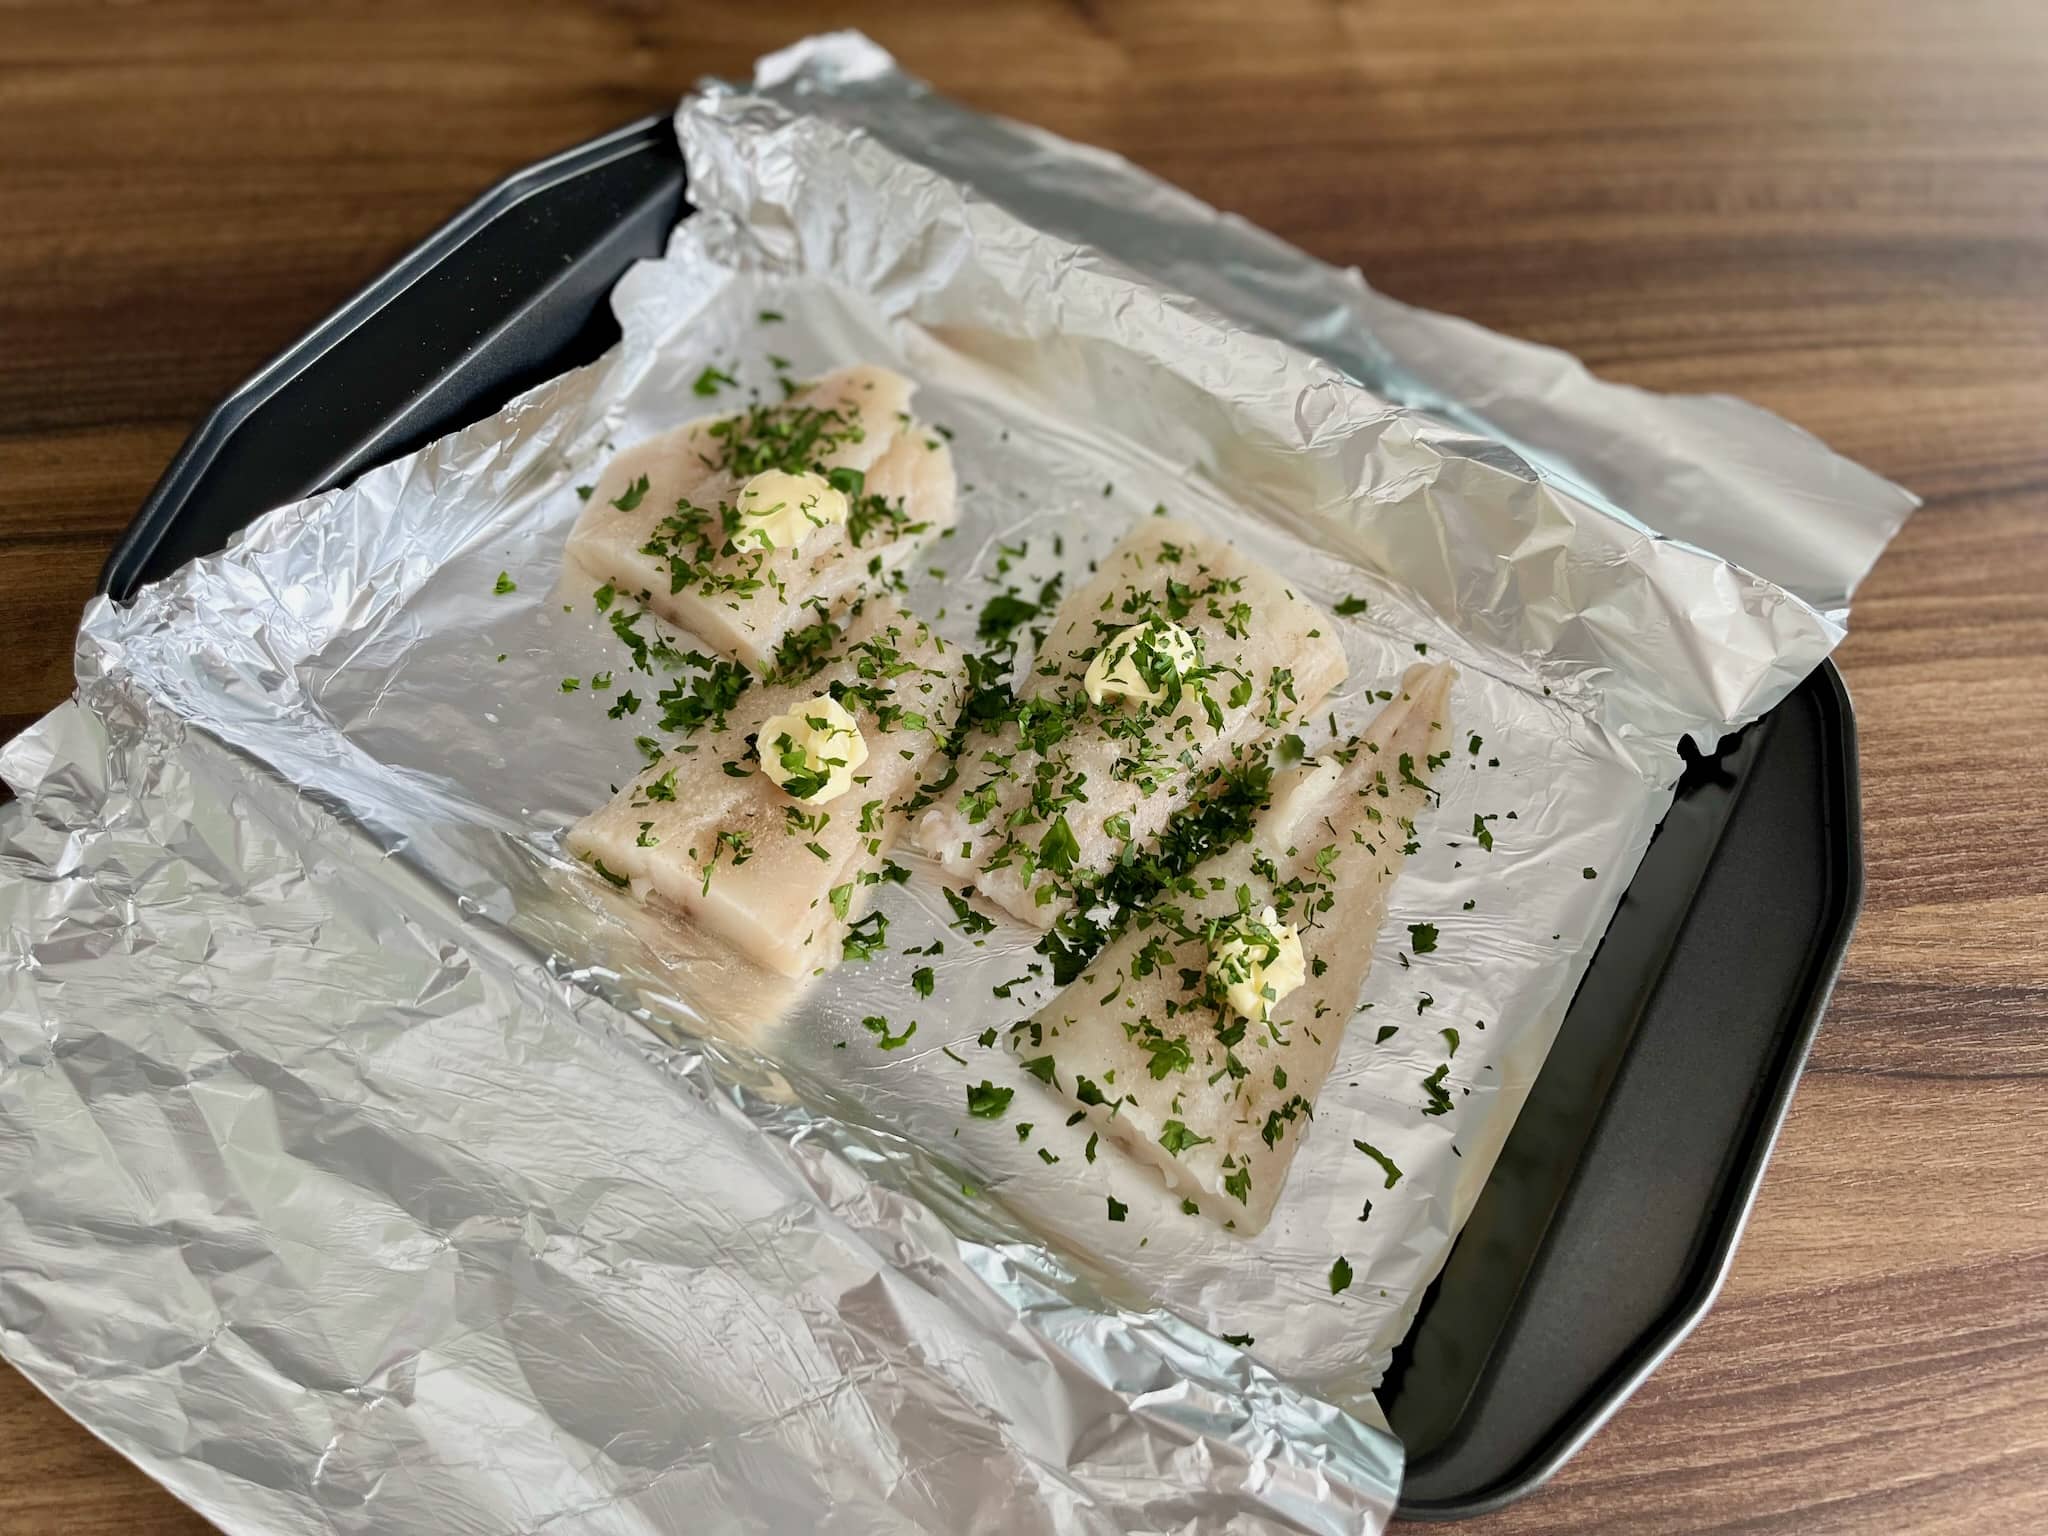 Fish fillets on a baking tray seasoned, with butter, garlic, parsley and lemon juice ready to bake.